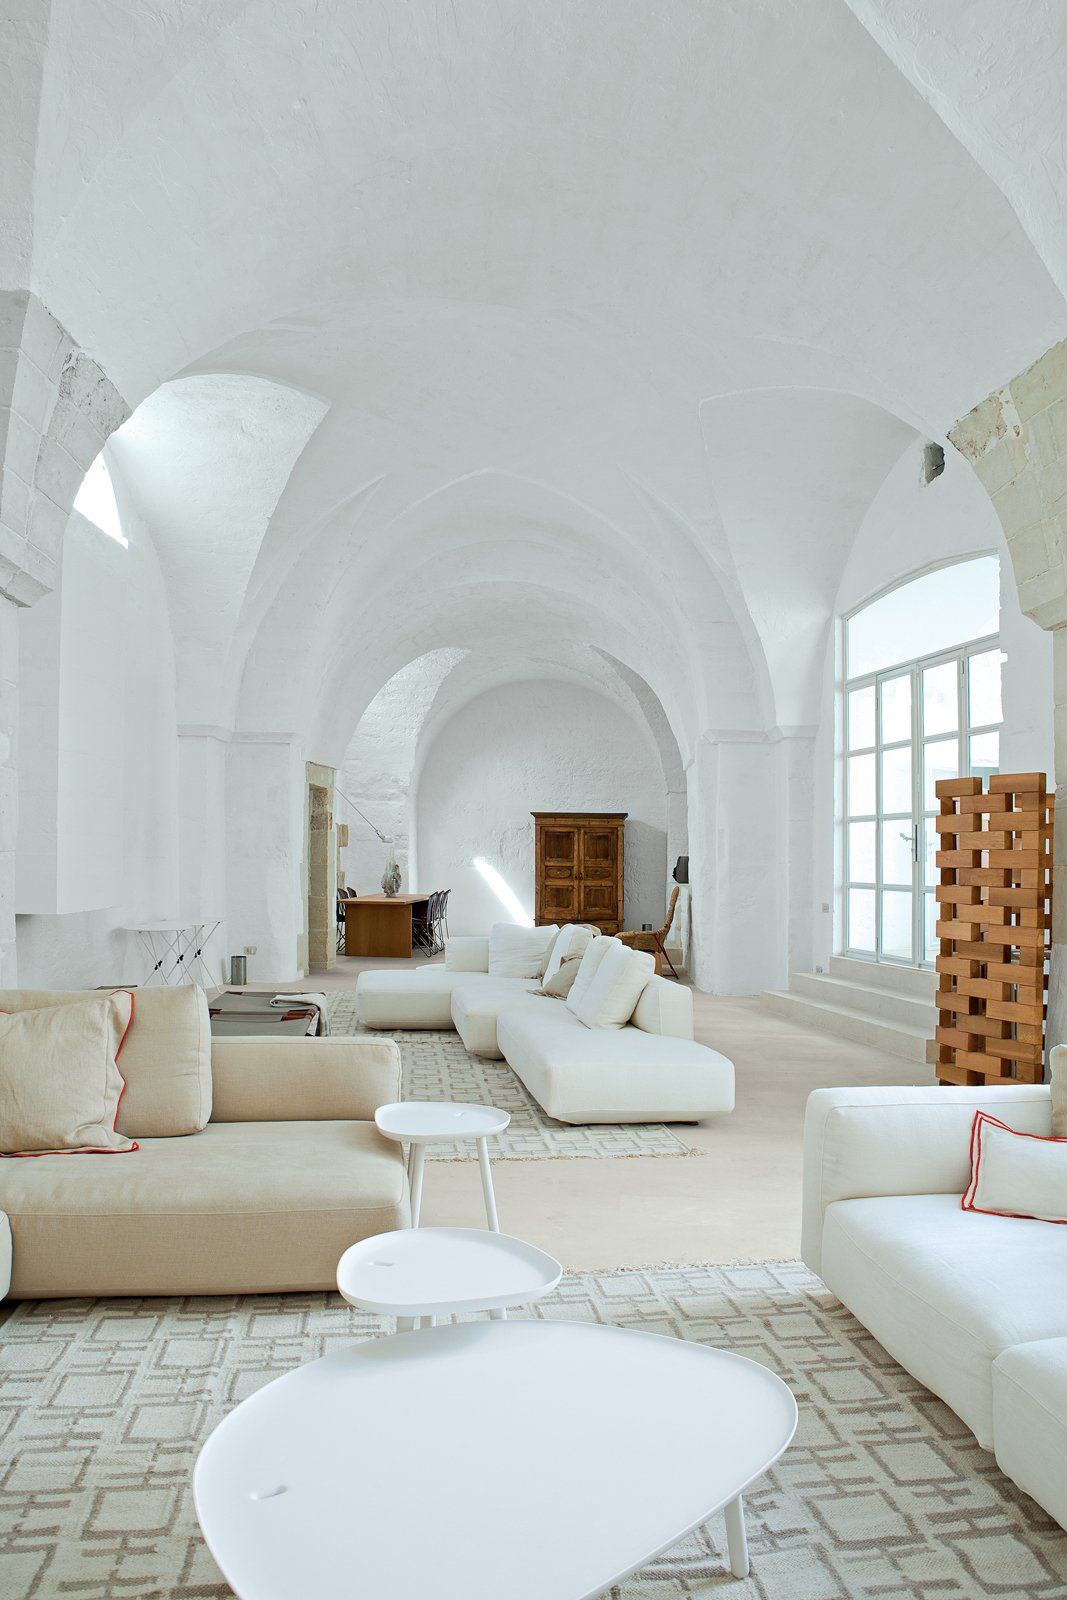 Modern Meets Ancient in a Renovated Italian Vacation Home